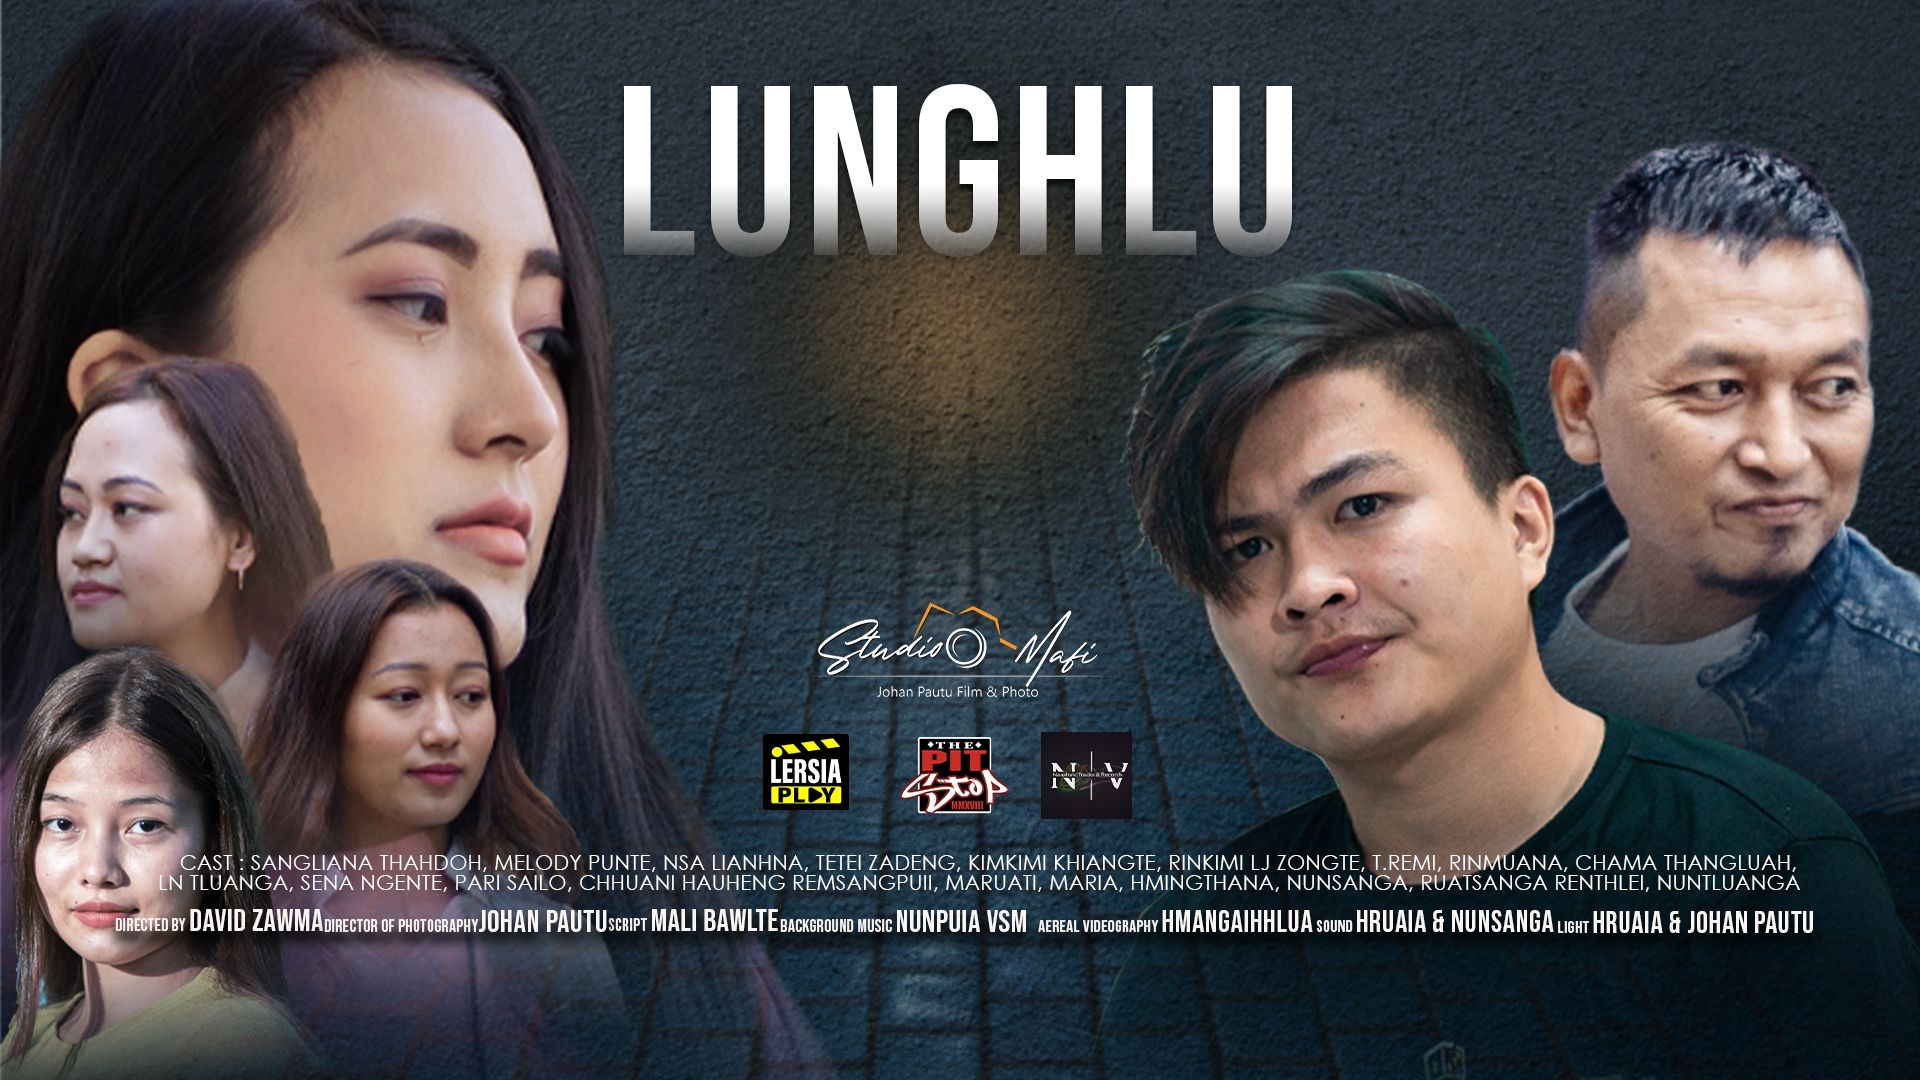 Lunghlu poster